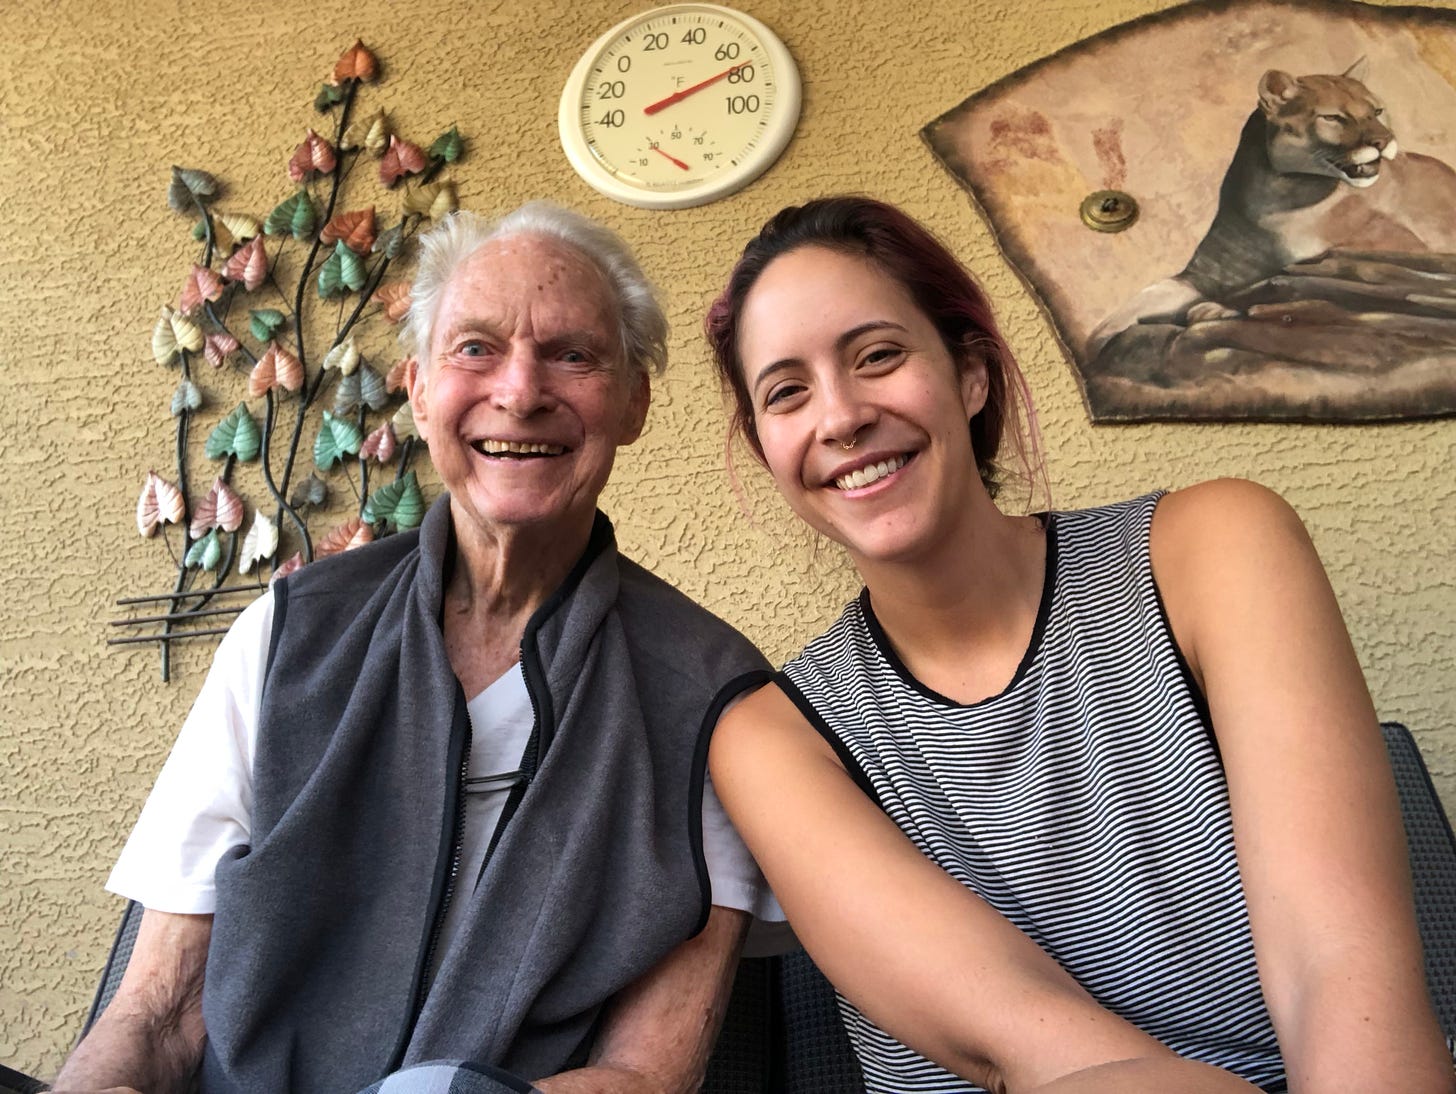 A 70-something-year-old man smiles for a photo with his 30-something-year-old granddaughter.